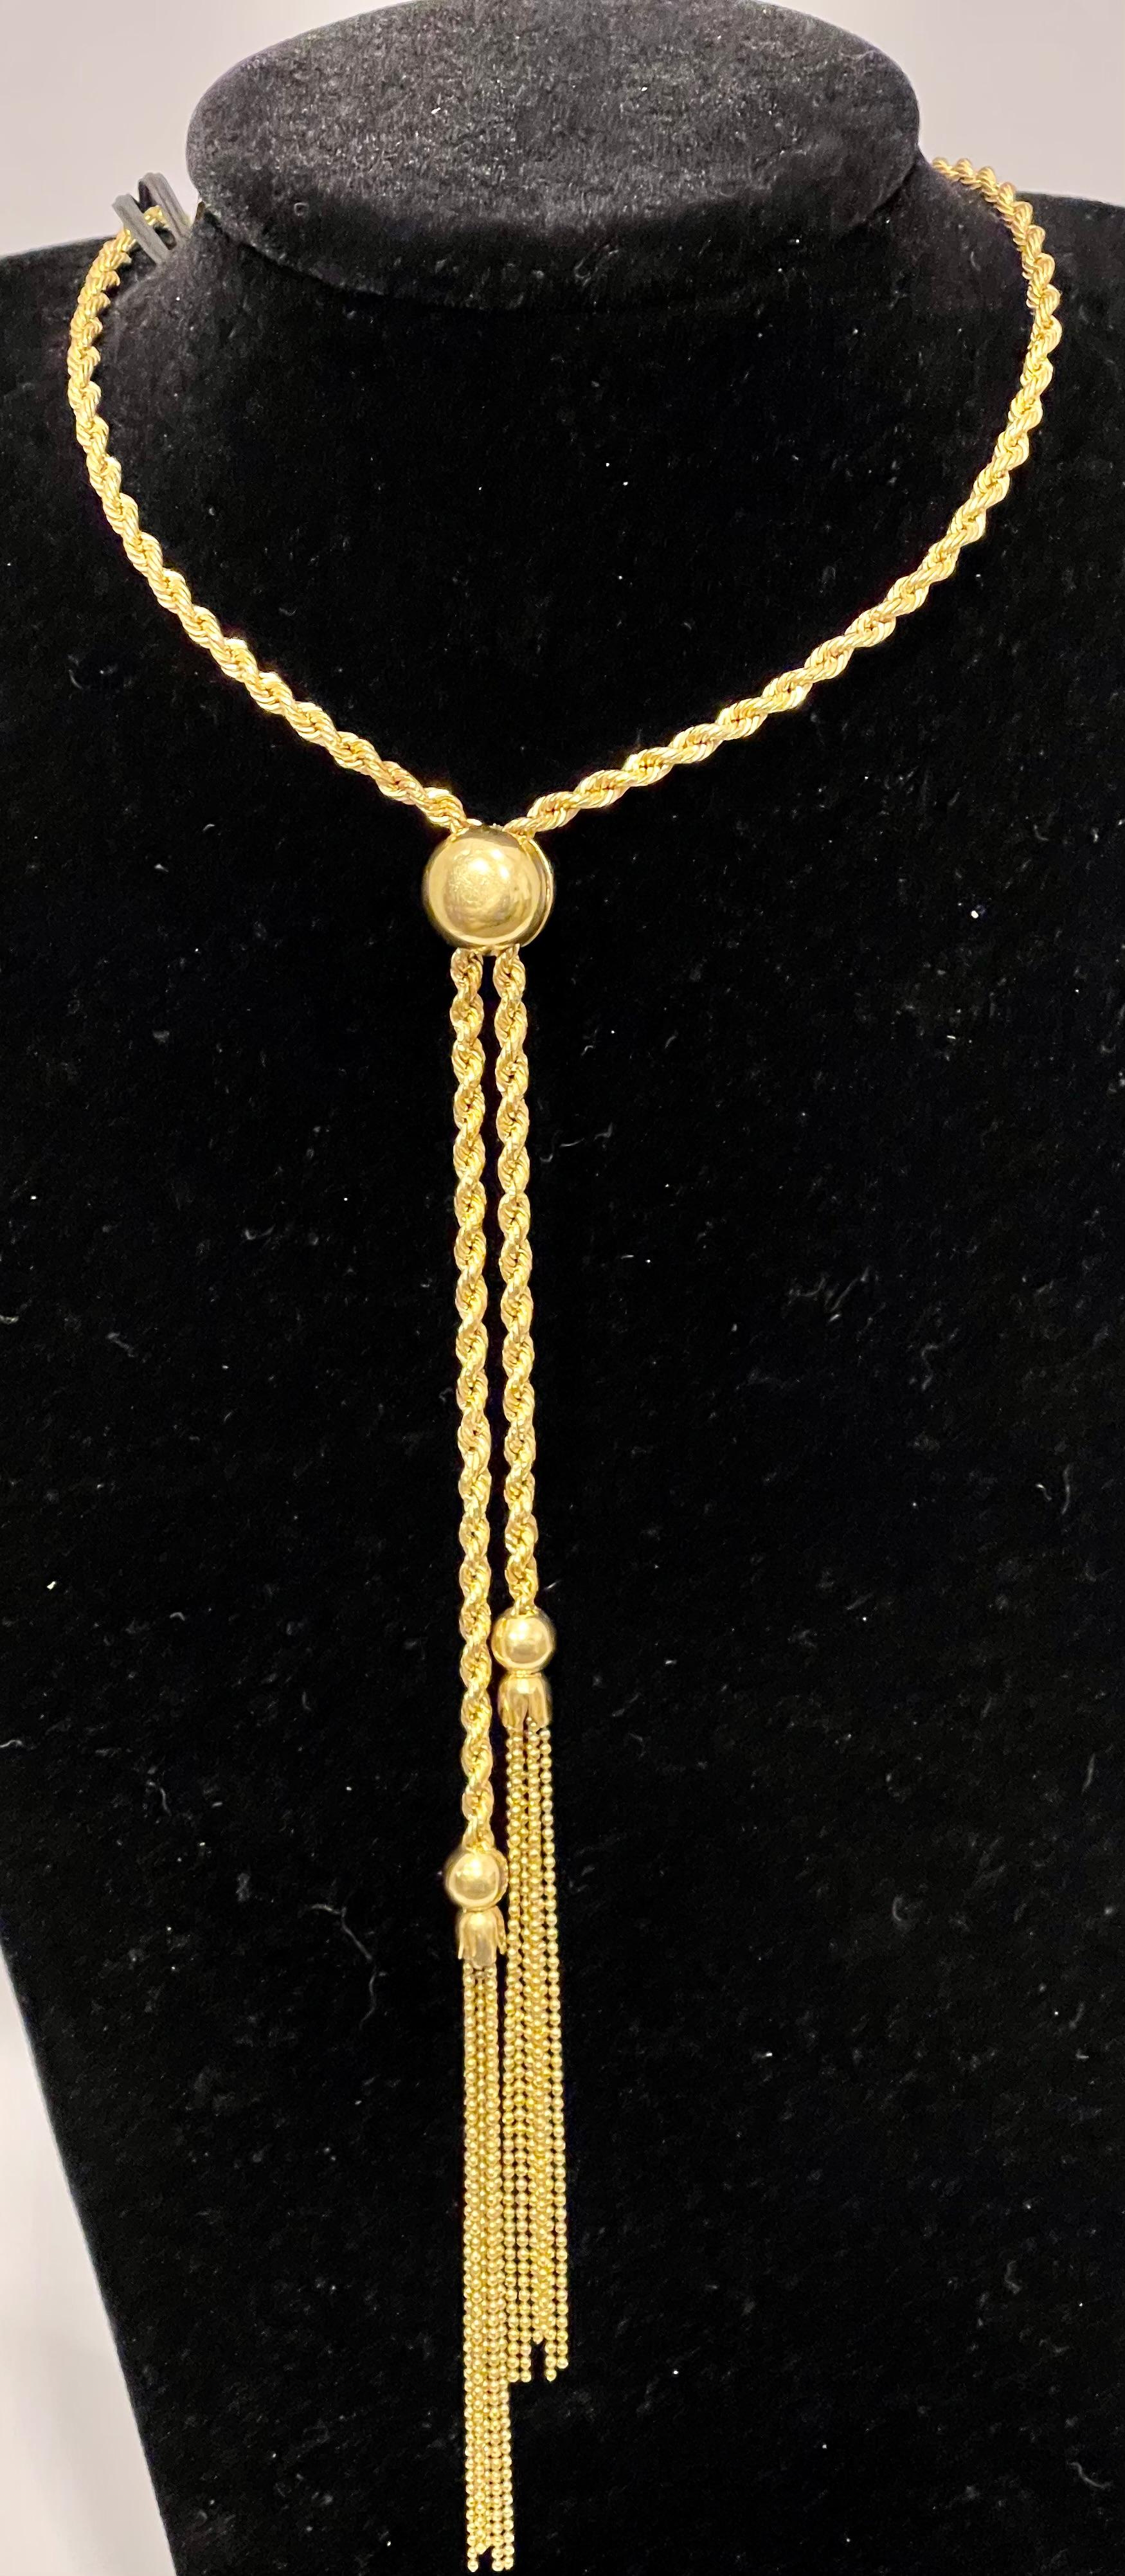 Vintage 18k Gold 18.7 Gm Rope Chain Adjustable Sliding Chain with Ball 5